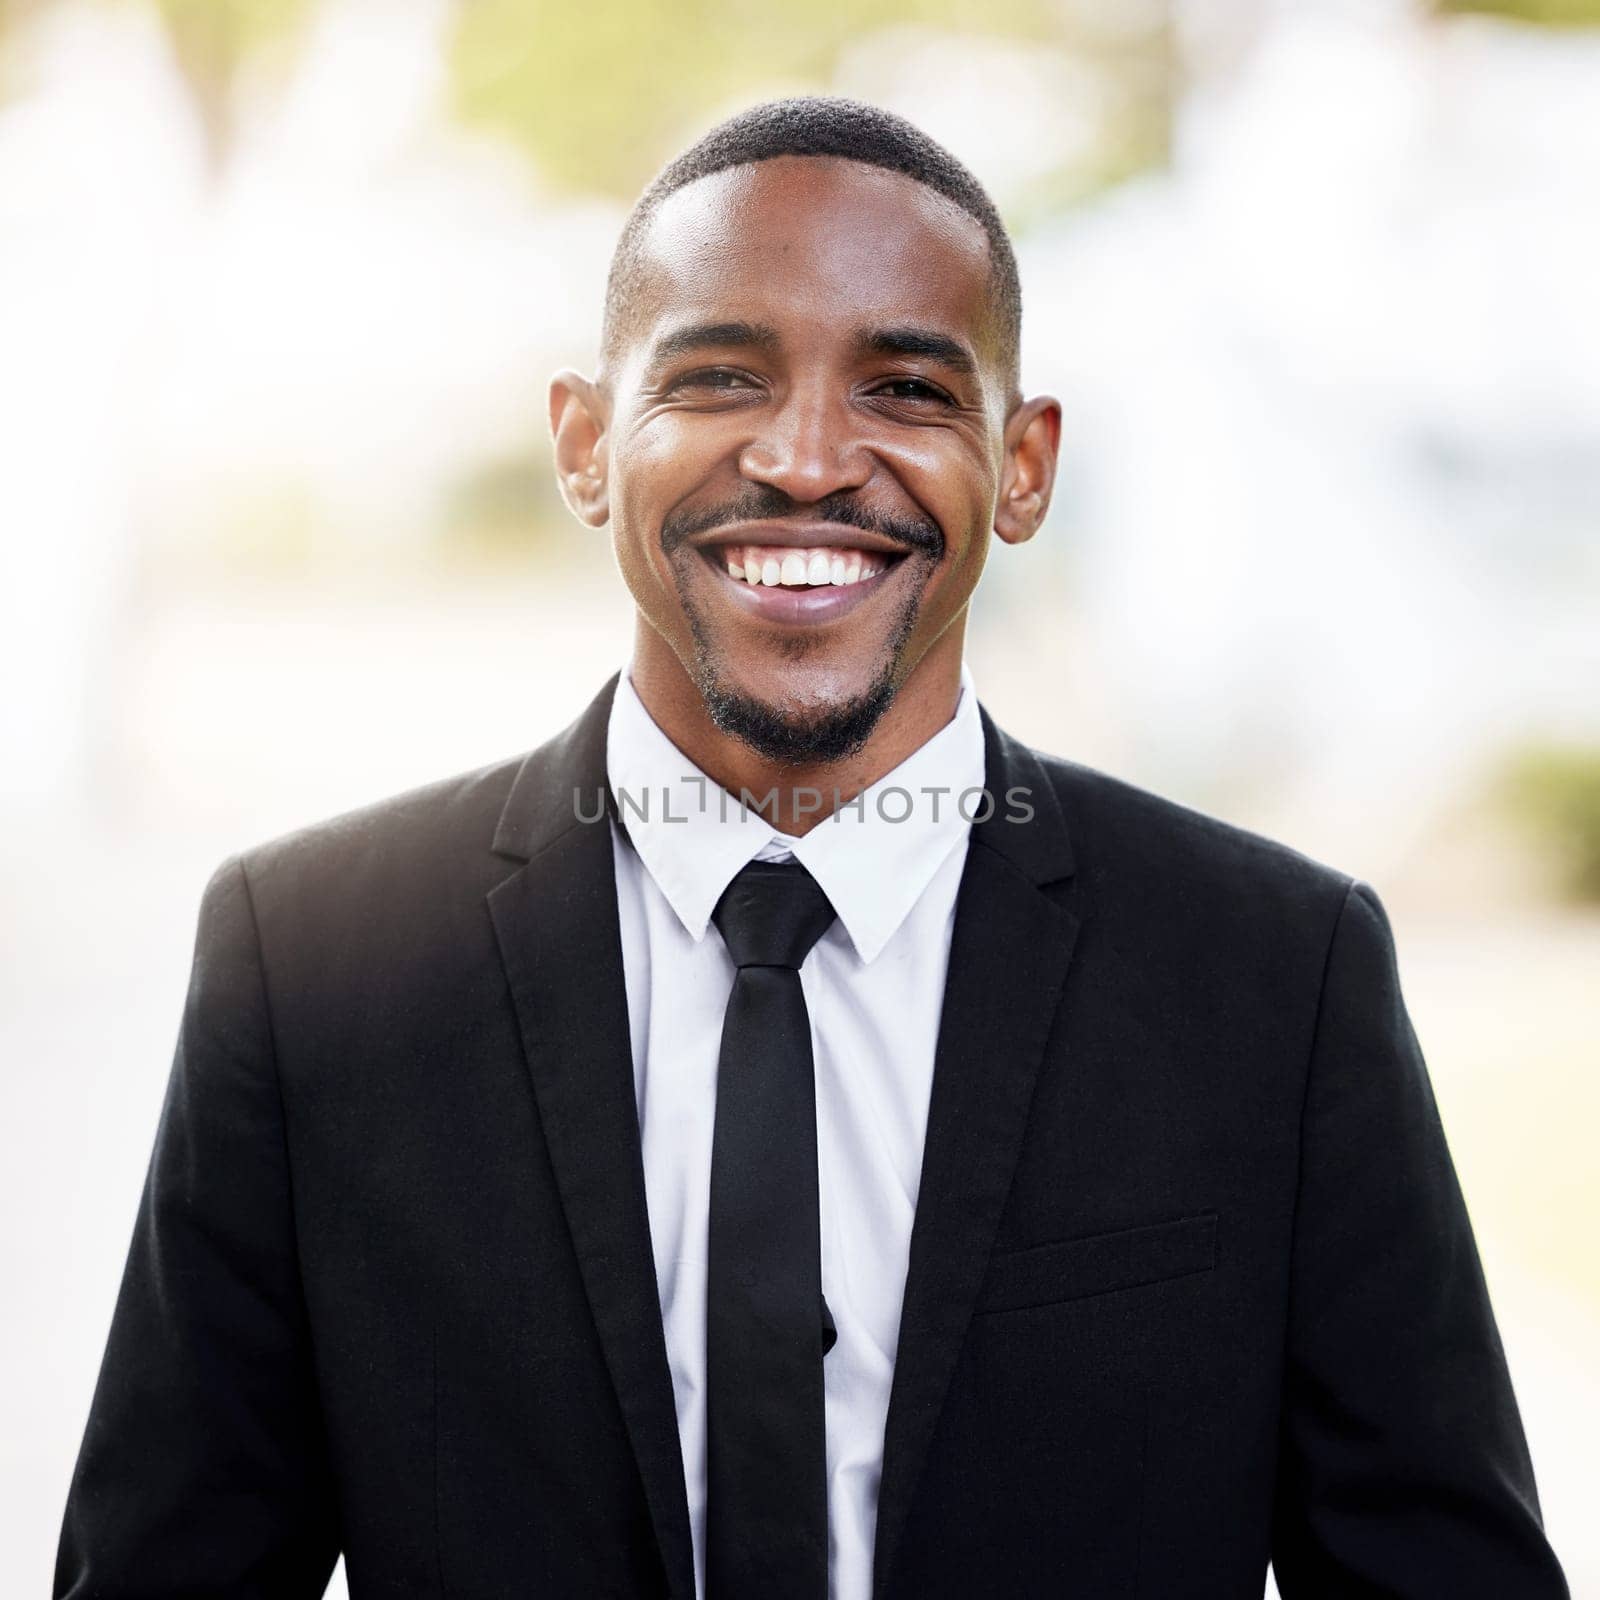 Happy, black man and fashion in portrait with formal suit outdoor with ambition and insight for business. Confident, male model or financial broker with smile and pride outside for morning commute.